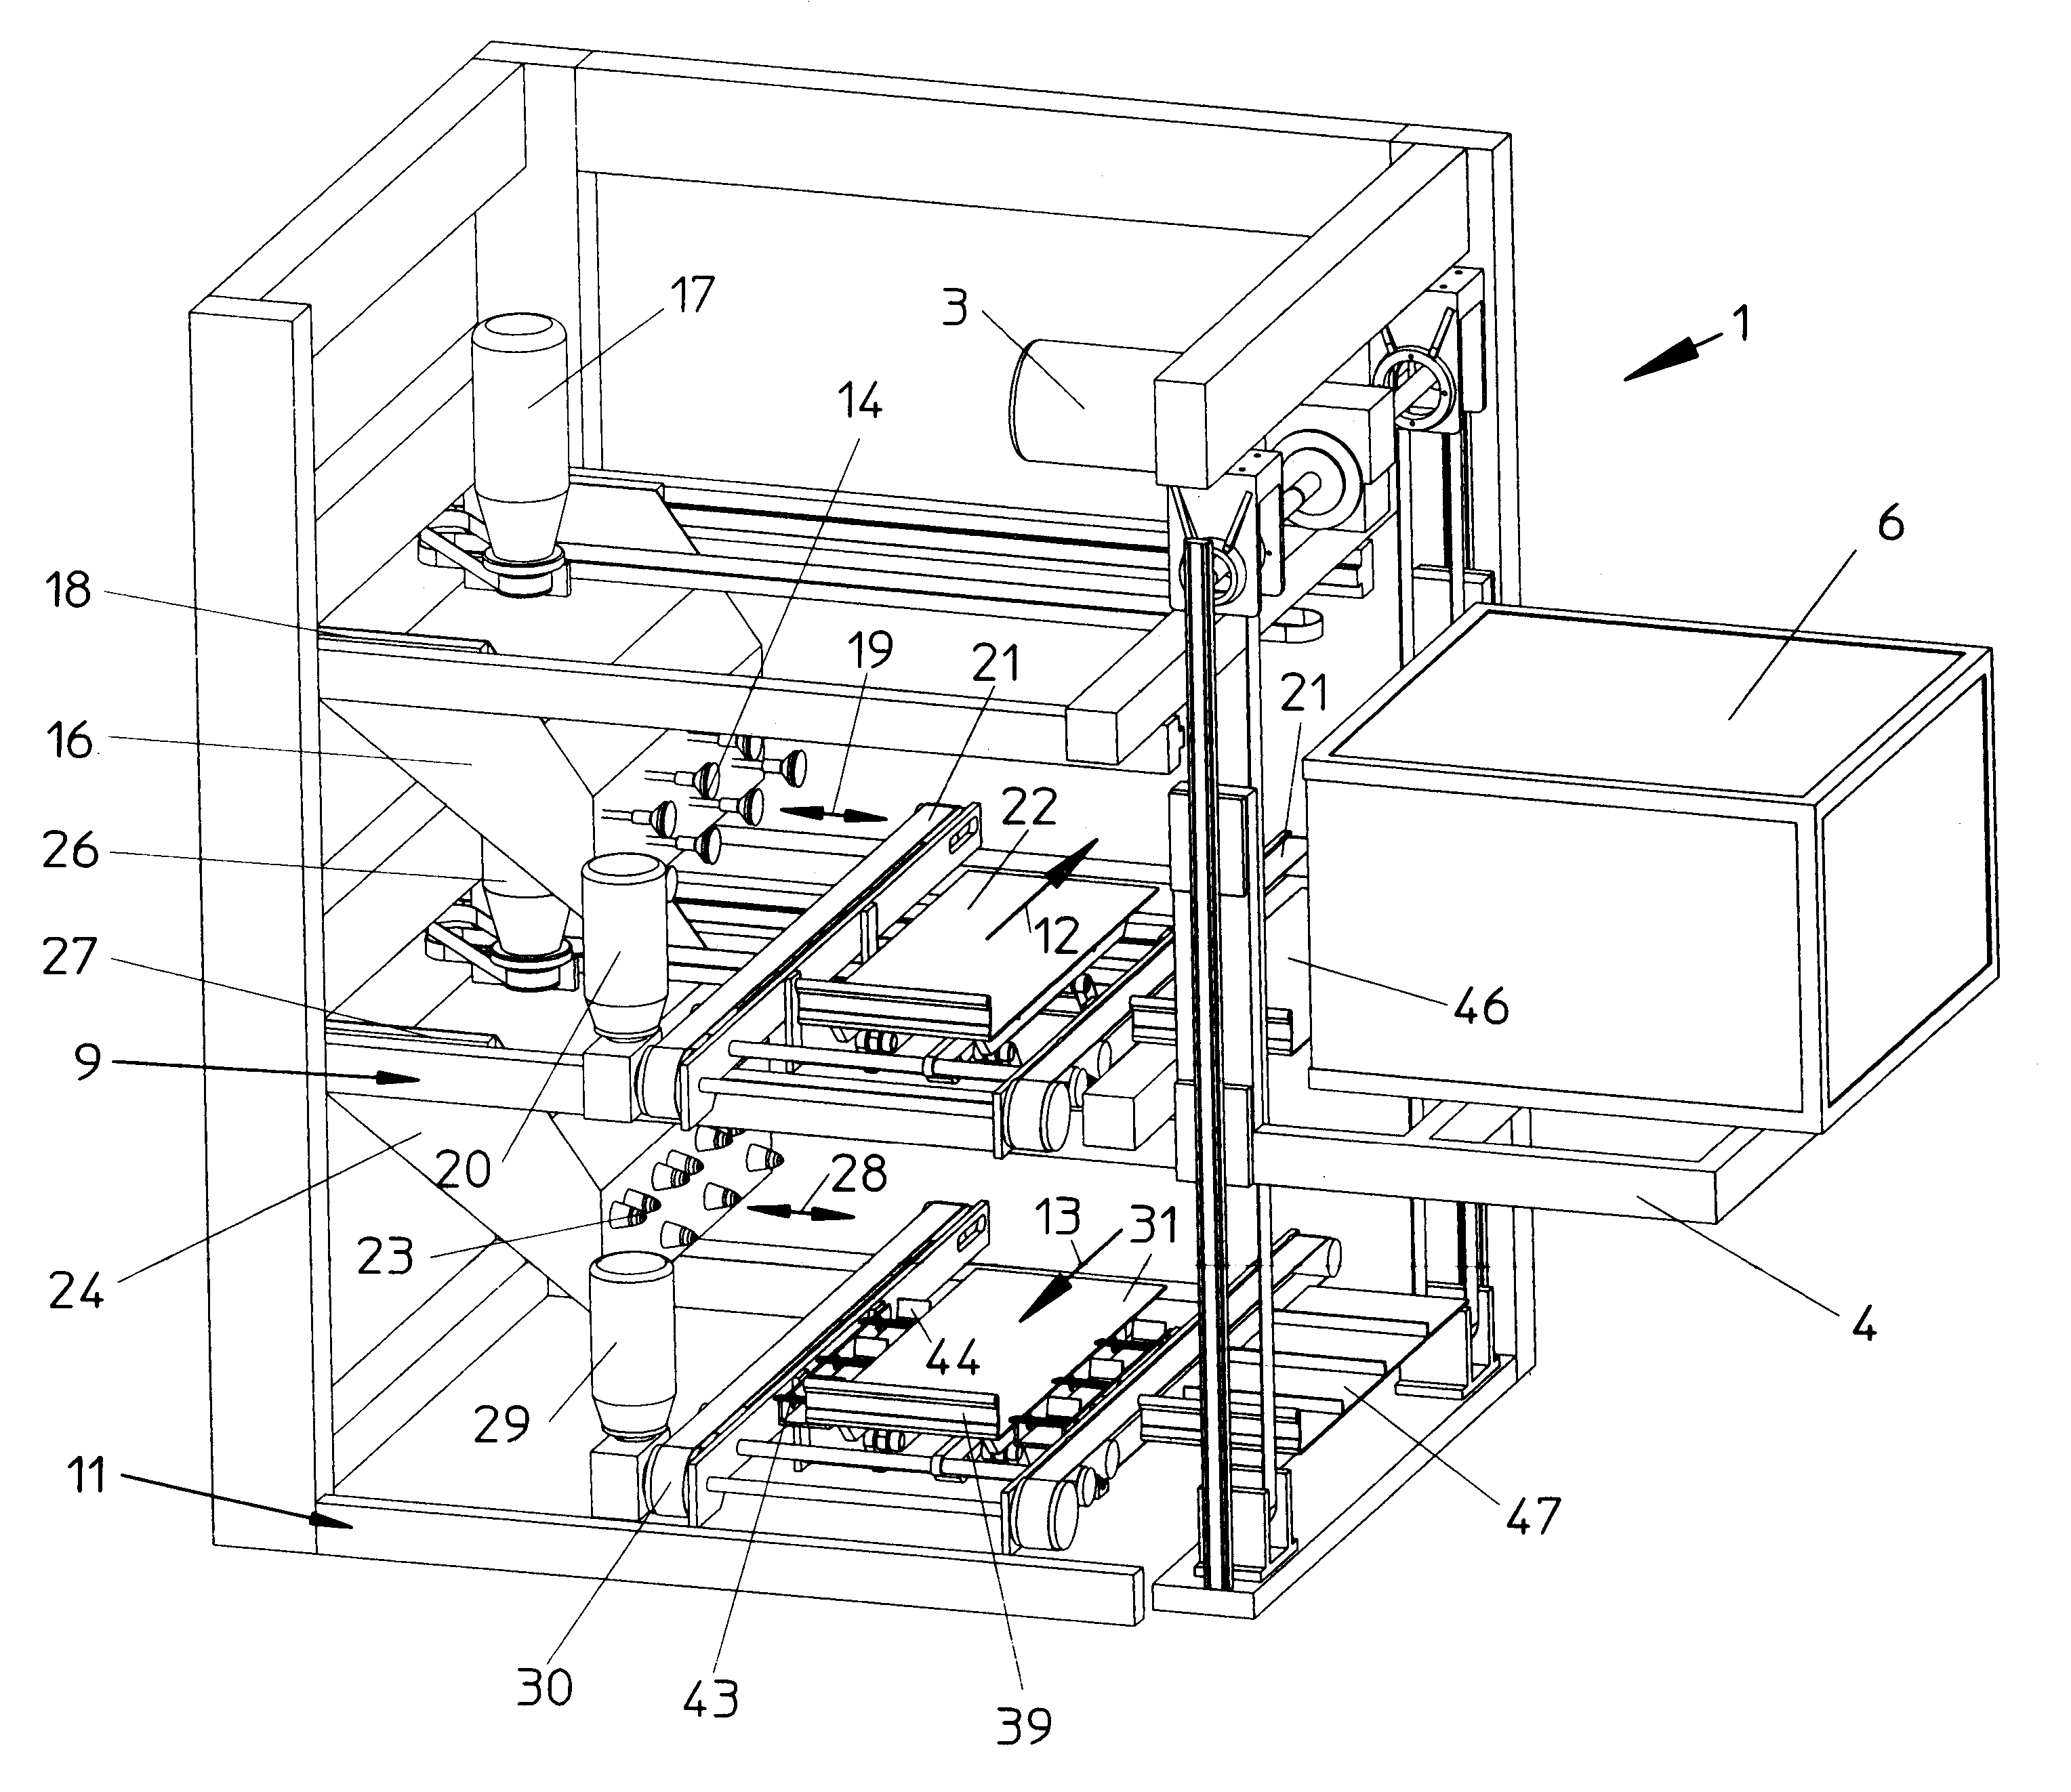 Method of and apparatus for manipulating cigarette trays